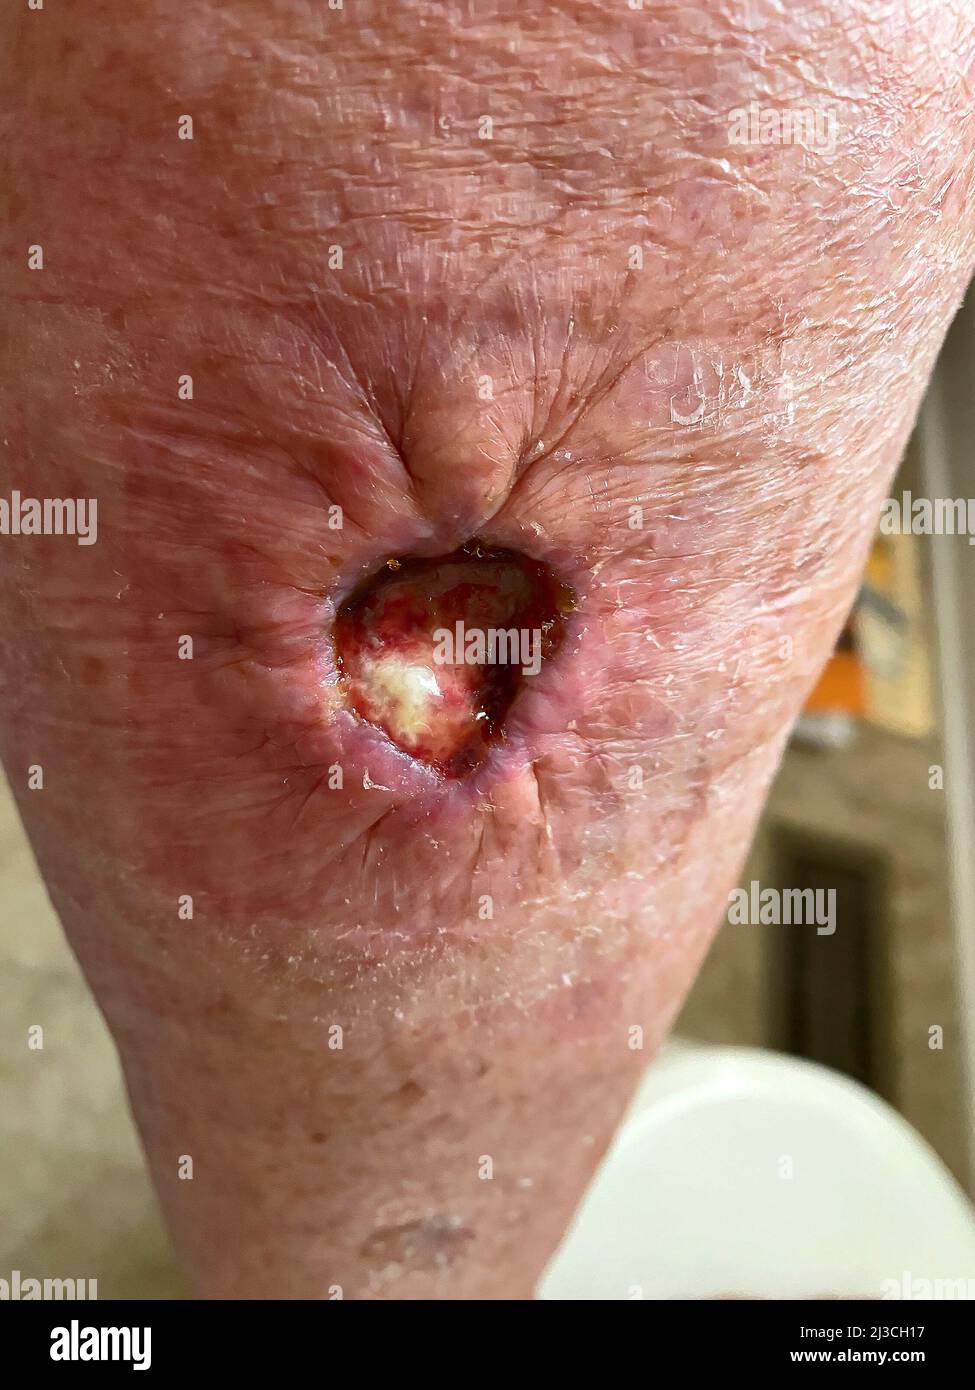 open leg wound, 2 weeks after Mohs surgery, remove squamous cell carcinoma, purse string sutures, cavity, skin, sutures, medical, MR Stock Photo